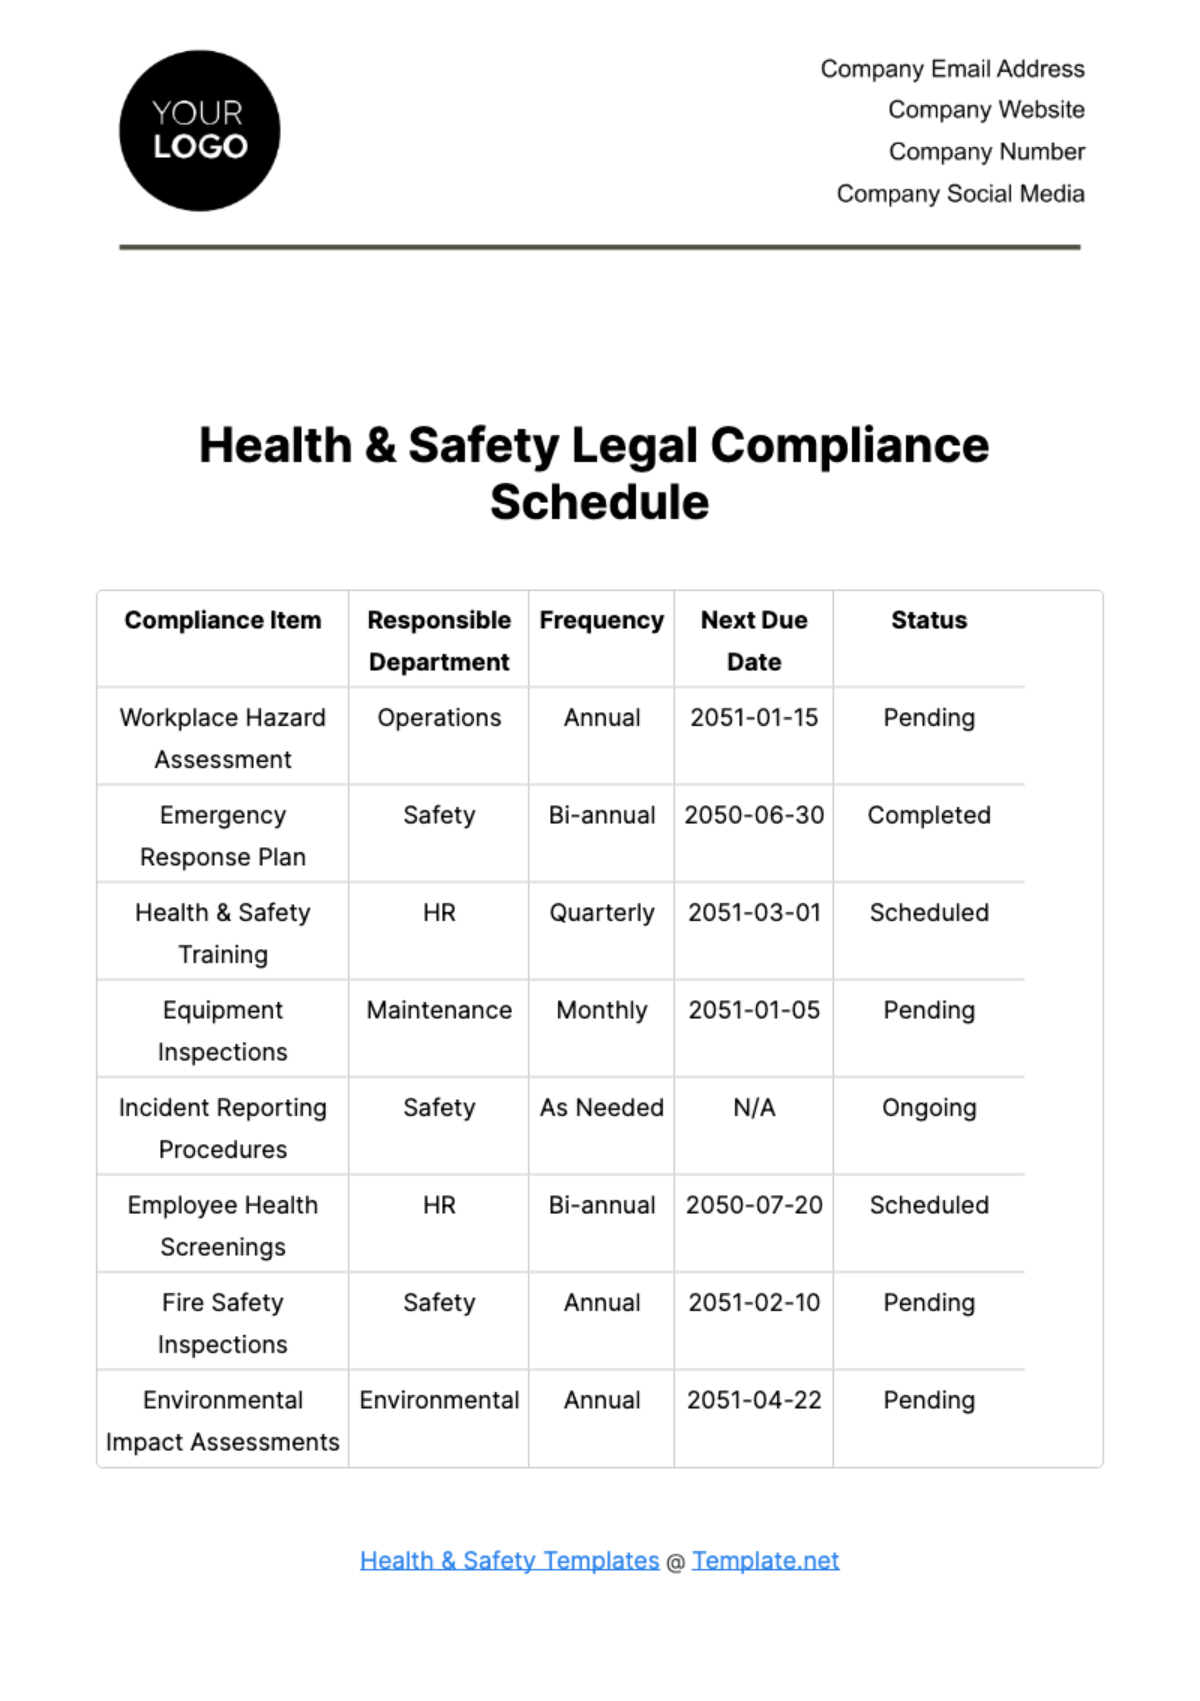 Free Health & Safety Legal Compliance Schedule Template